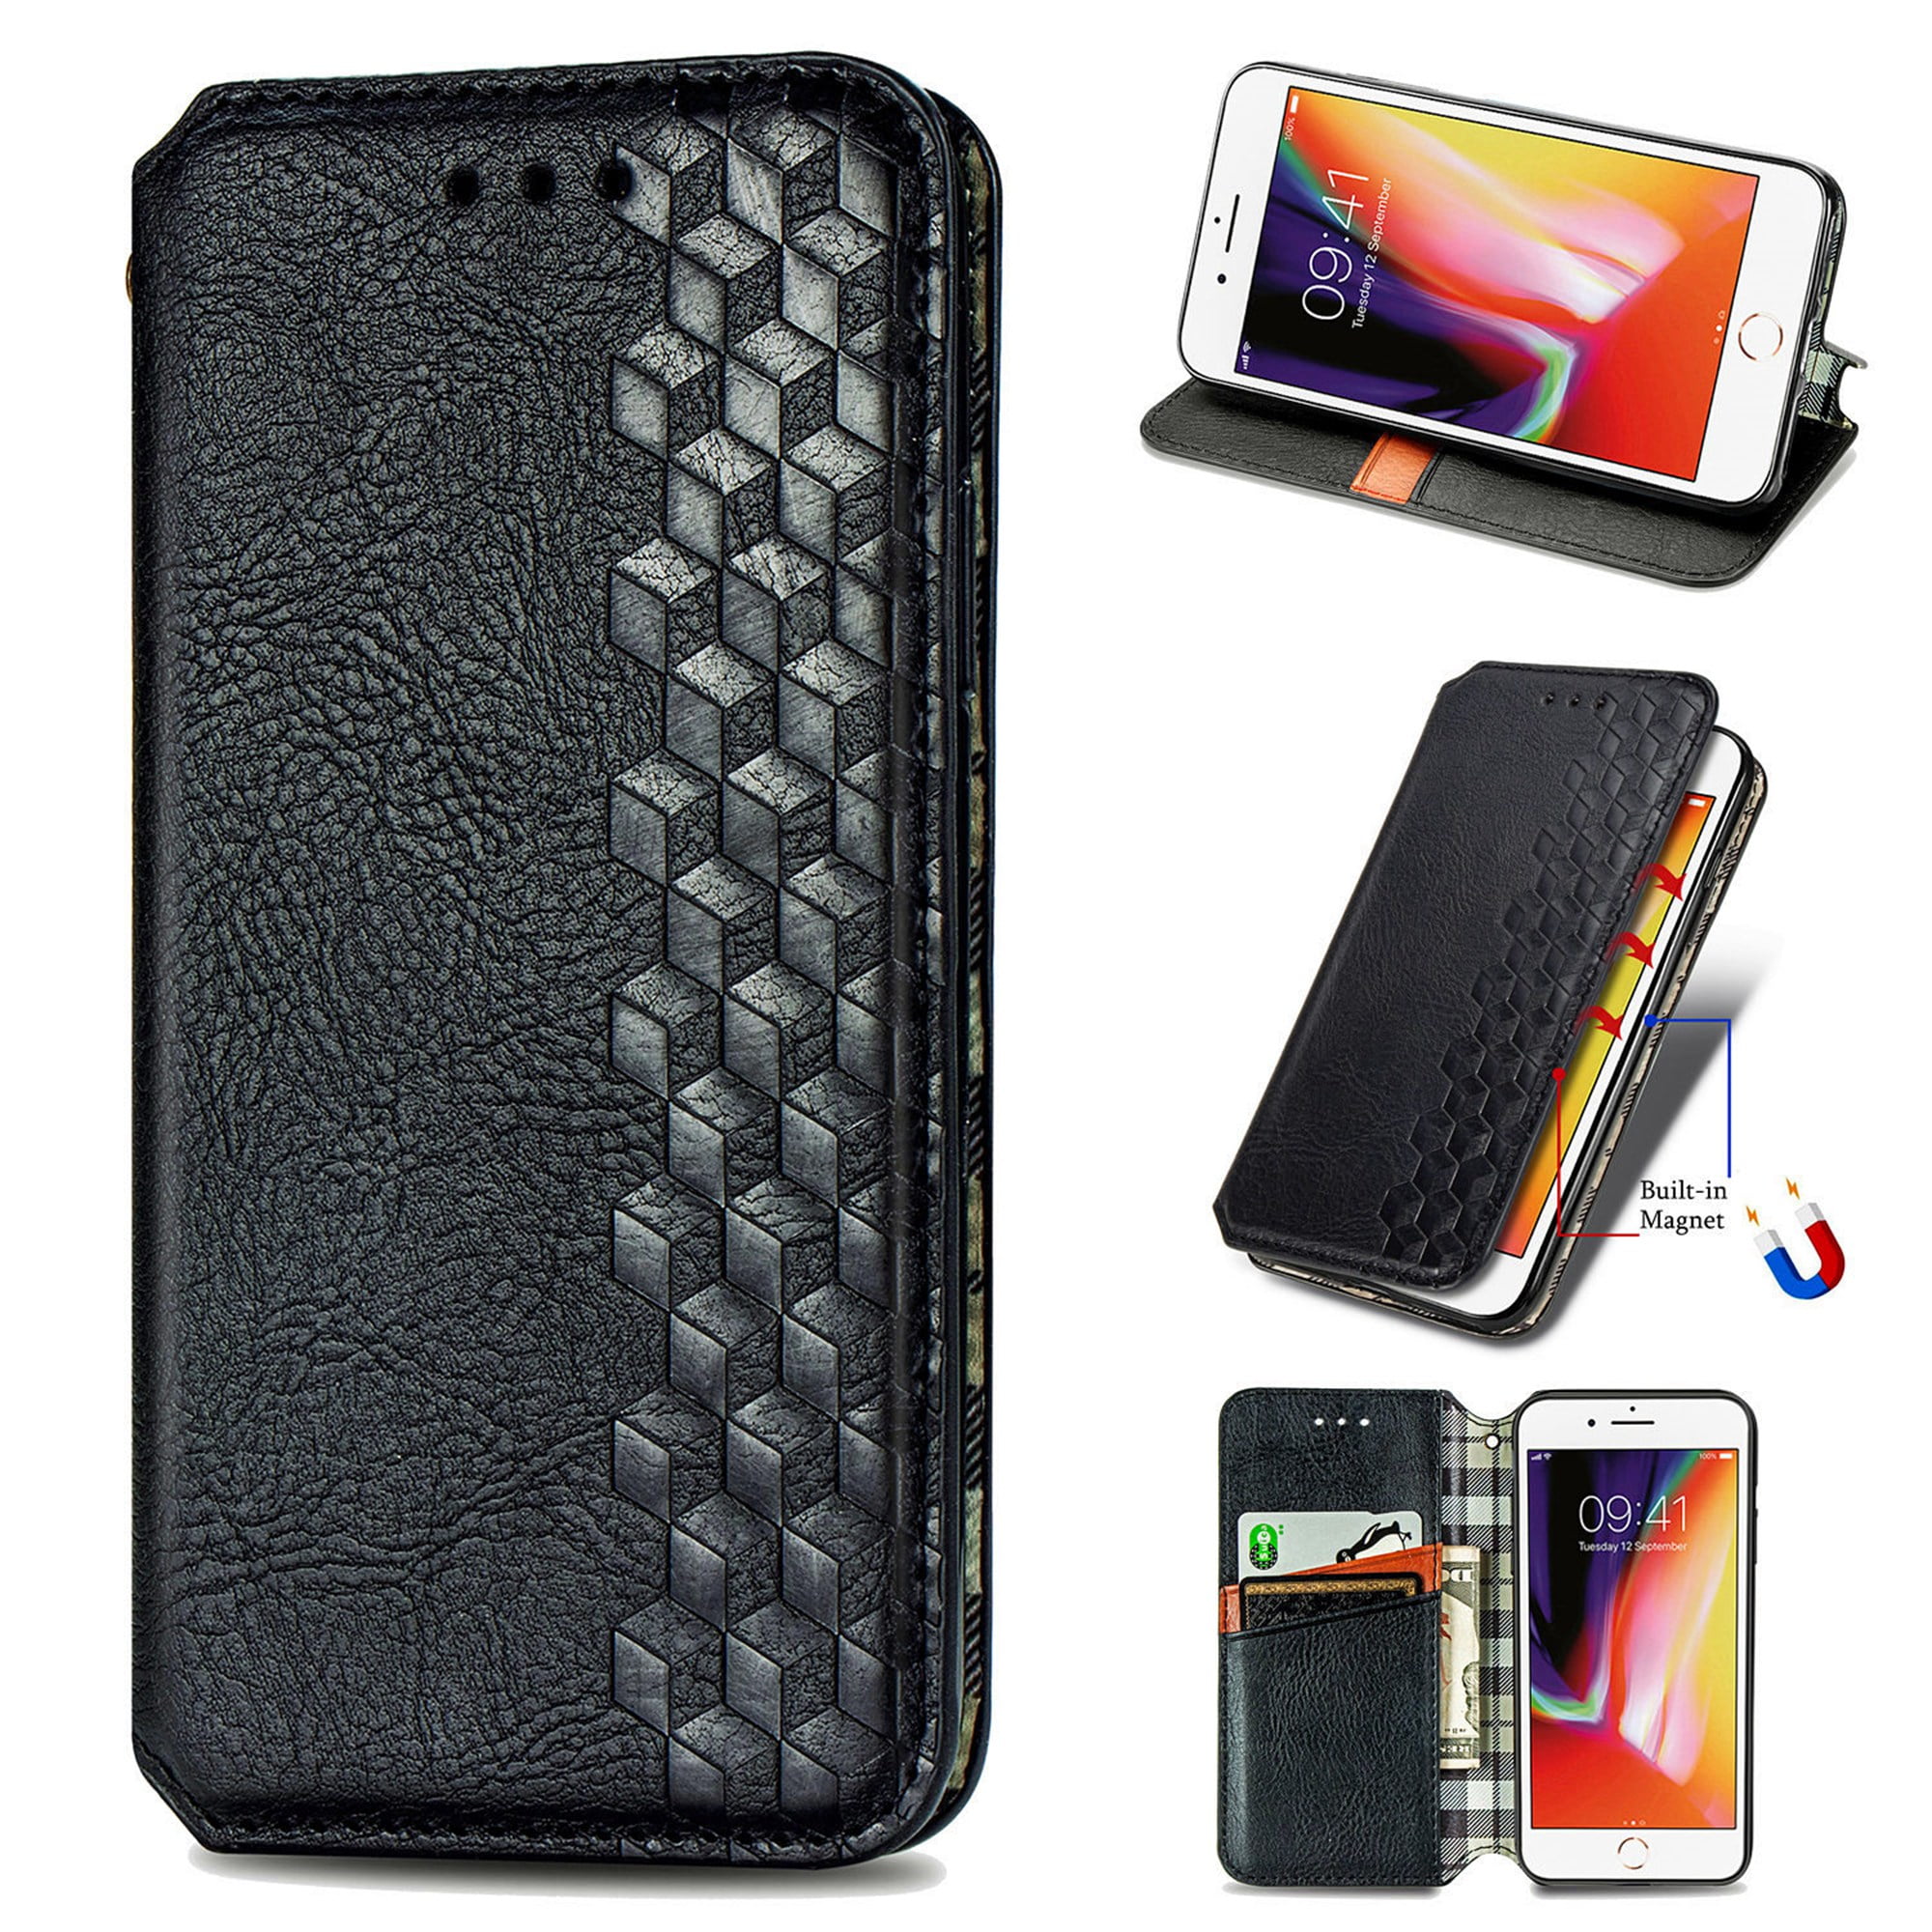 Window View PU Leather Case Wallet Case Soft TPU Inner with Magnetic Closure Kickstand Folio Flip Protective Cover for Samsung Galaxy S9 Plus,Black Badalink For Samsung Galaxy S9 Plus Case, 